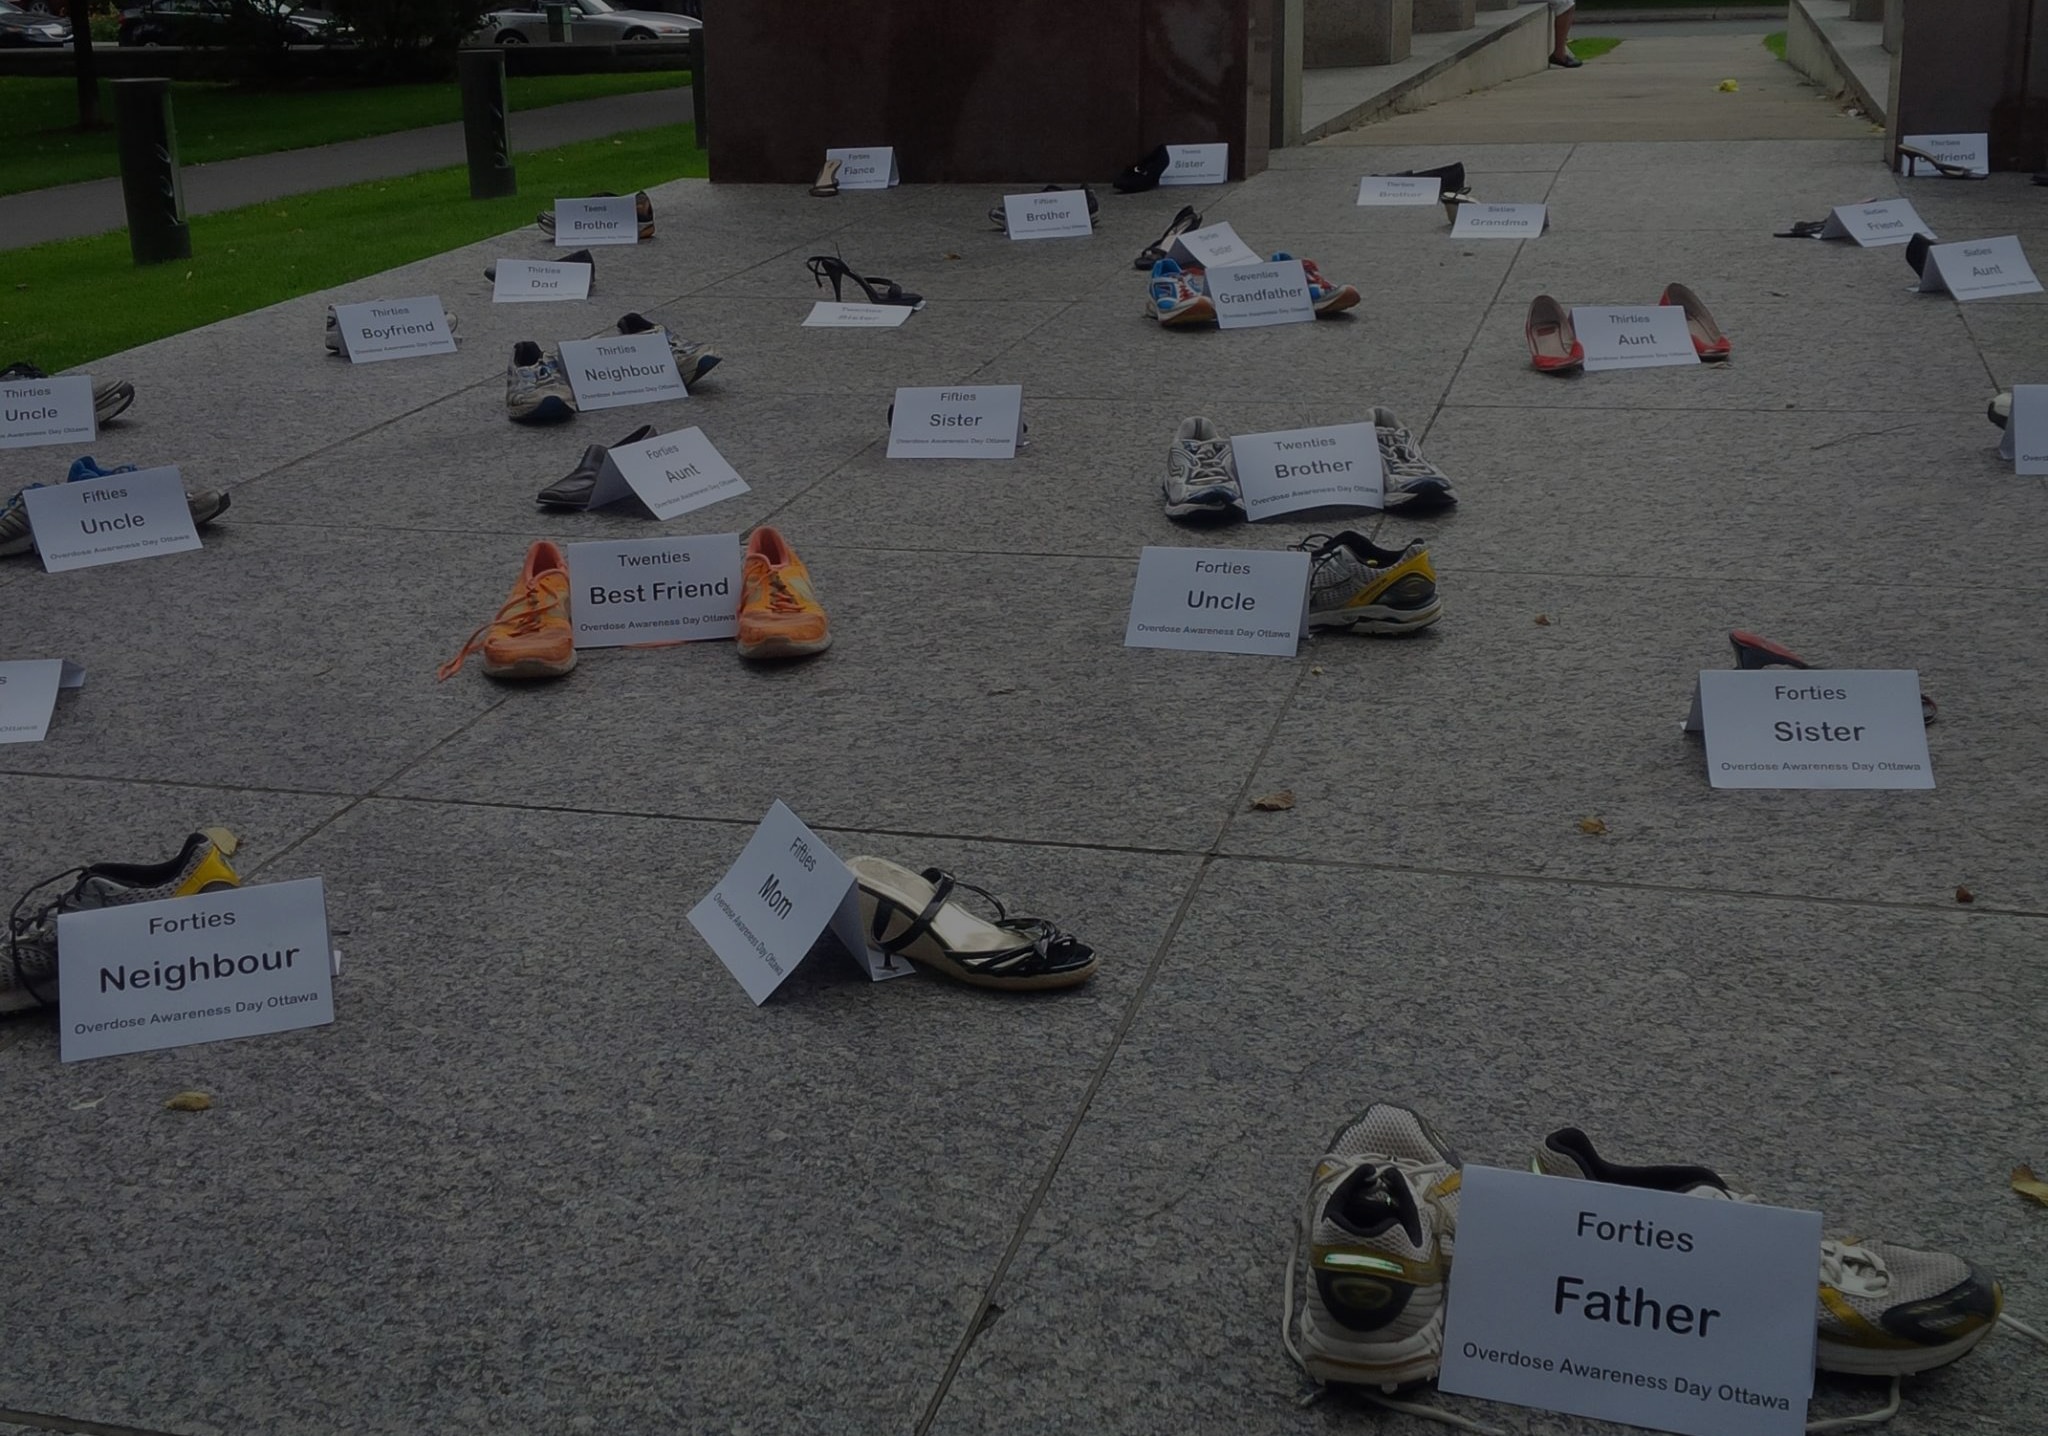 Shoes on the pavement with signs representing people who have died from overdose